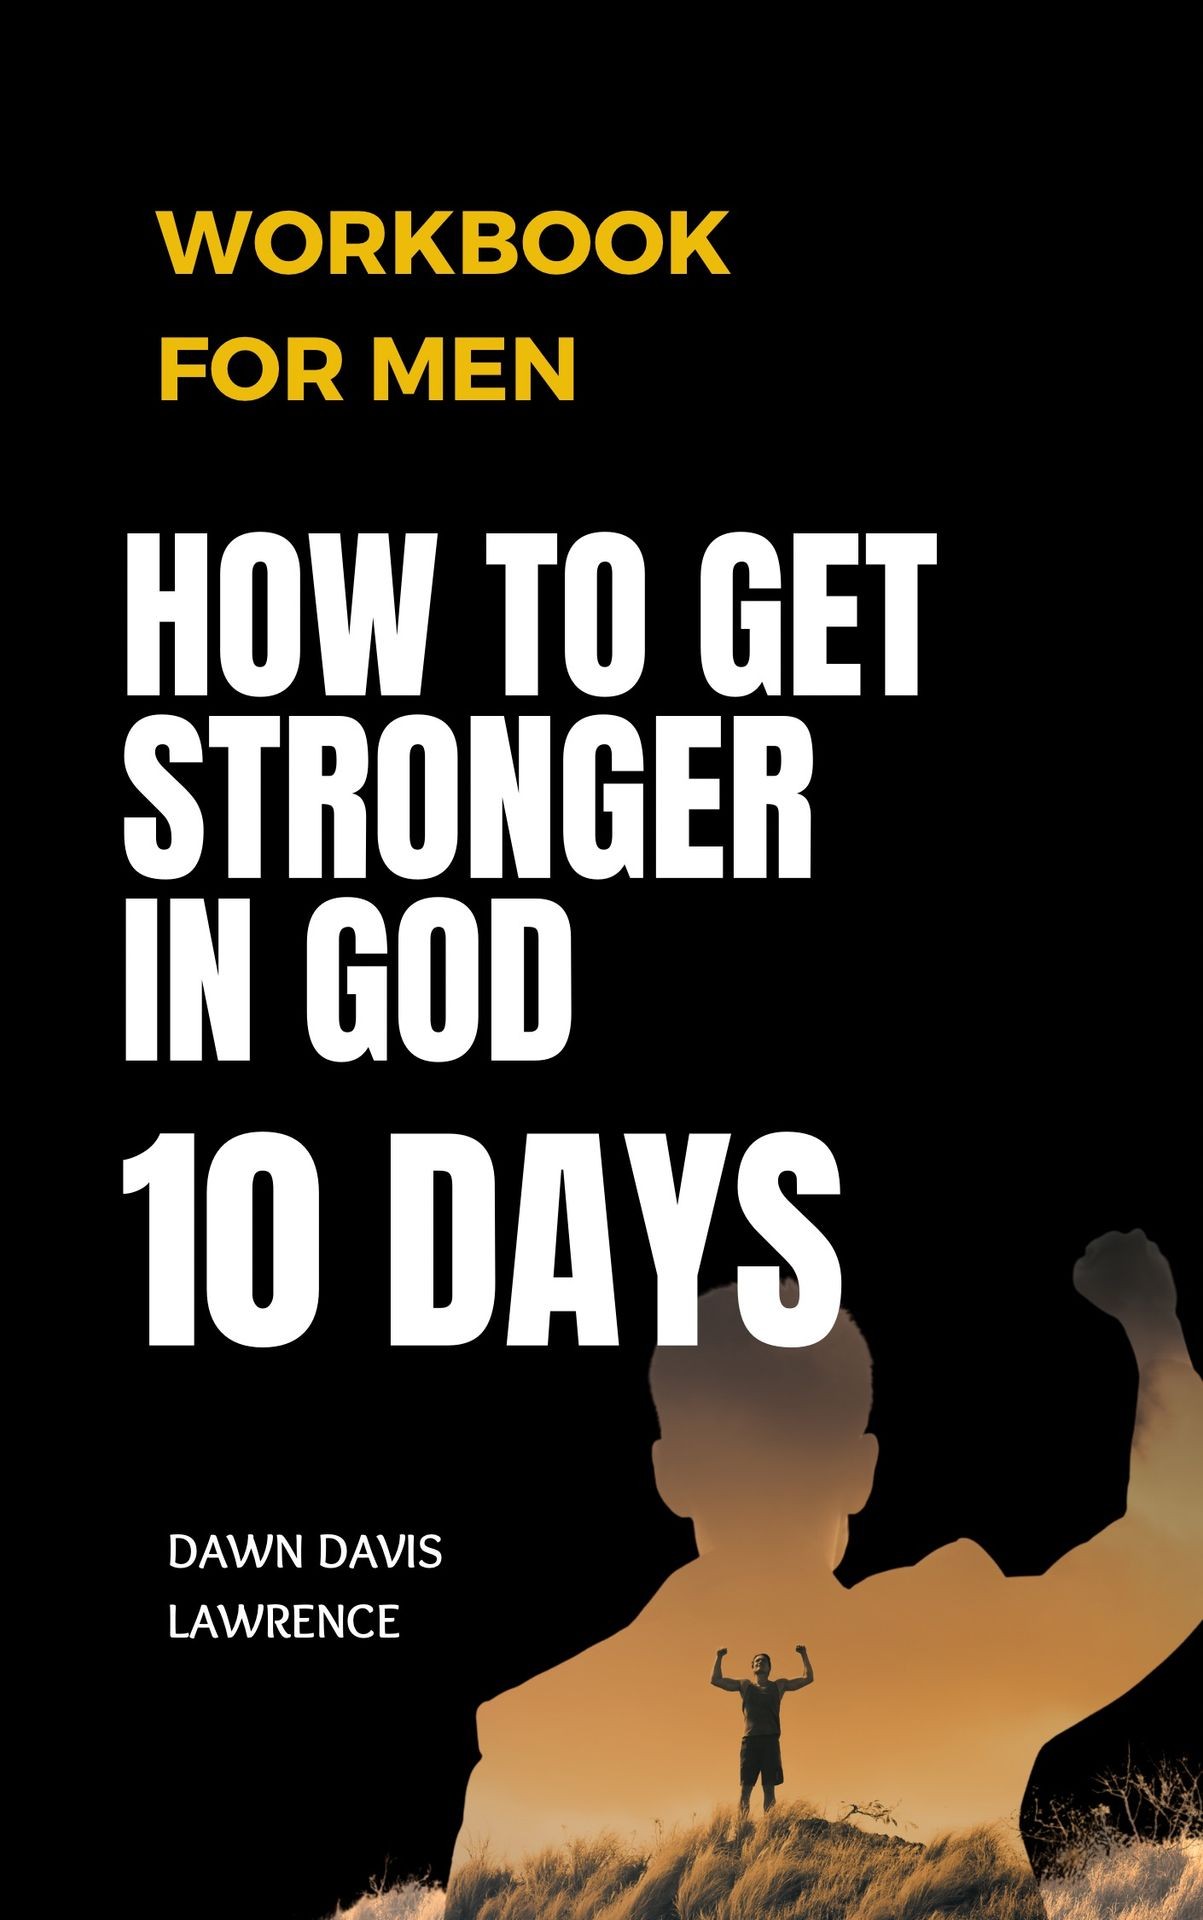 How to Get Stronger in God 